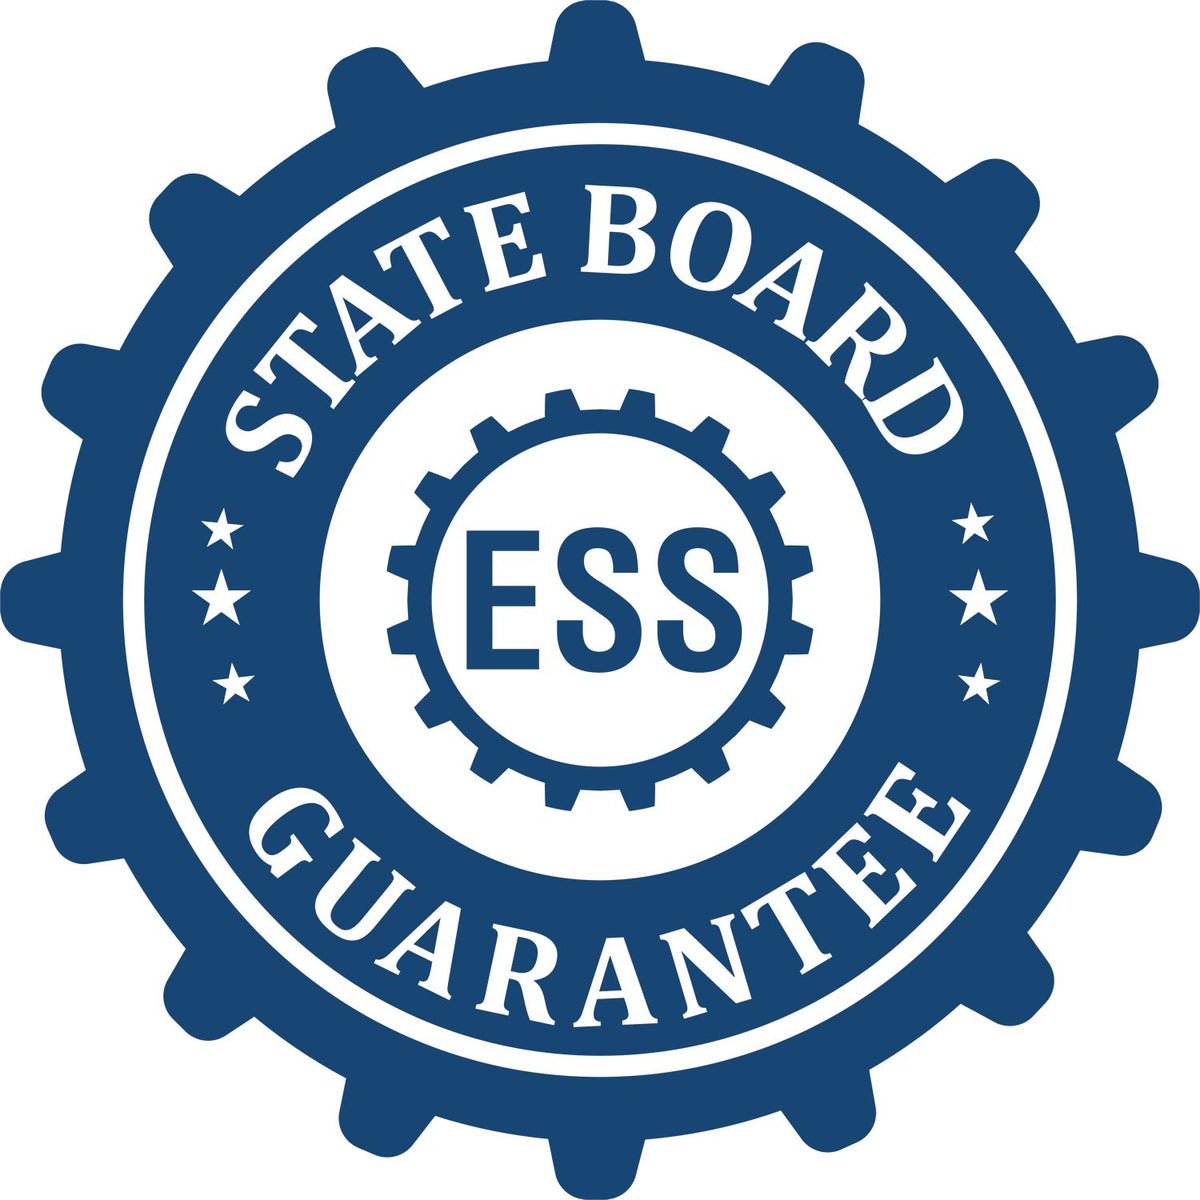 An emblem in a gear shape illustrating a state board guarantee for the New Hampshire Engineer Desk Seal product.